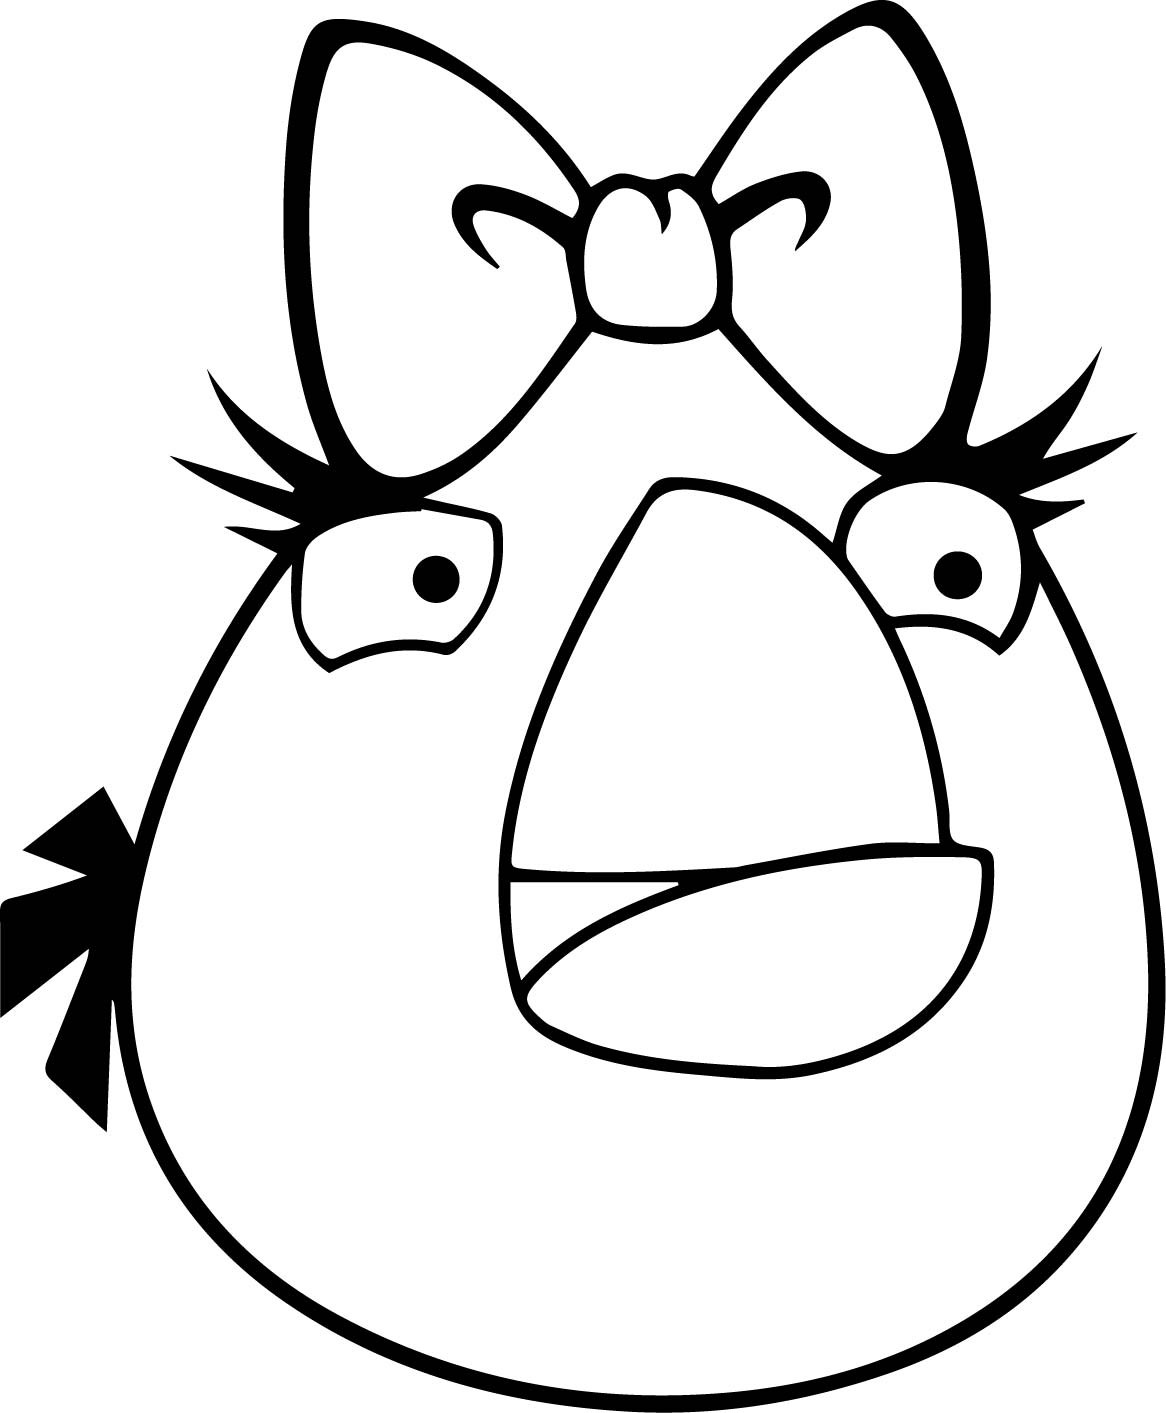 Girl Angry Birds Coloring Pages
 Angry Bird Girl White Bird Coloring Page